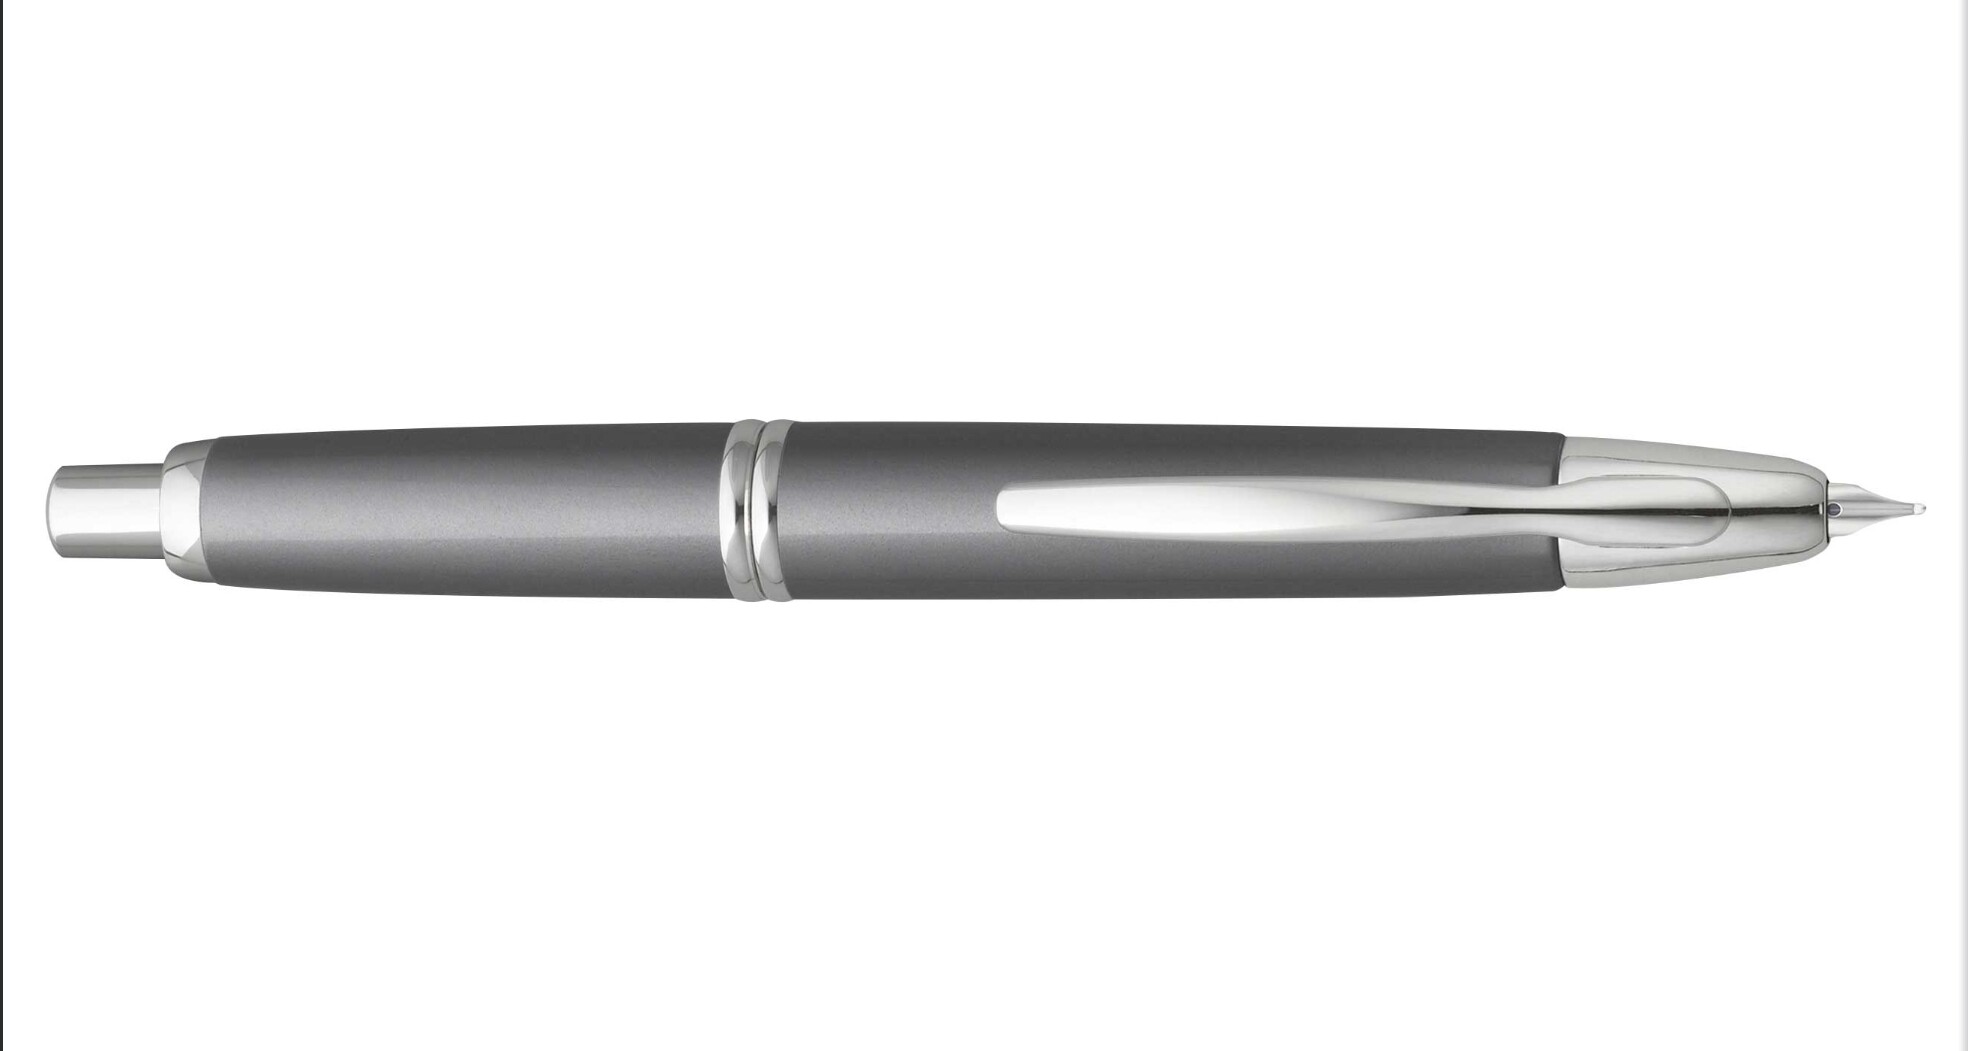 A gray Pilot Vanishing Point pen with silver trim, a capless design where the nib is hidden when not in use and the clip is toward the nib.